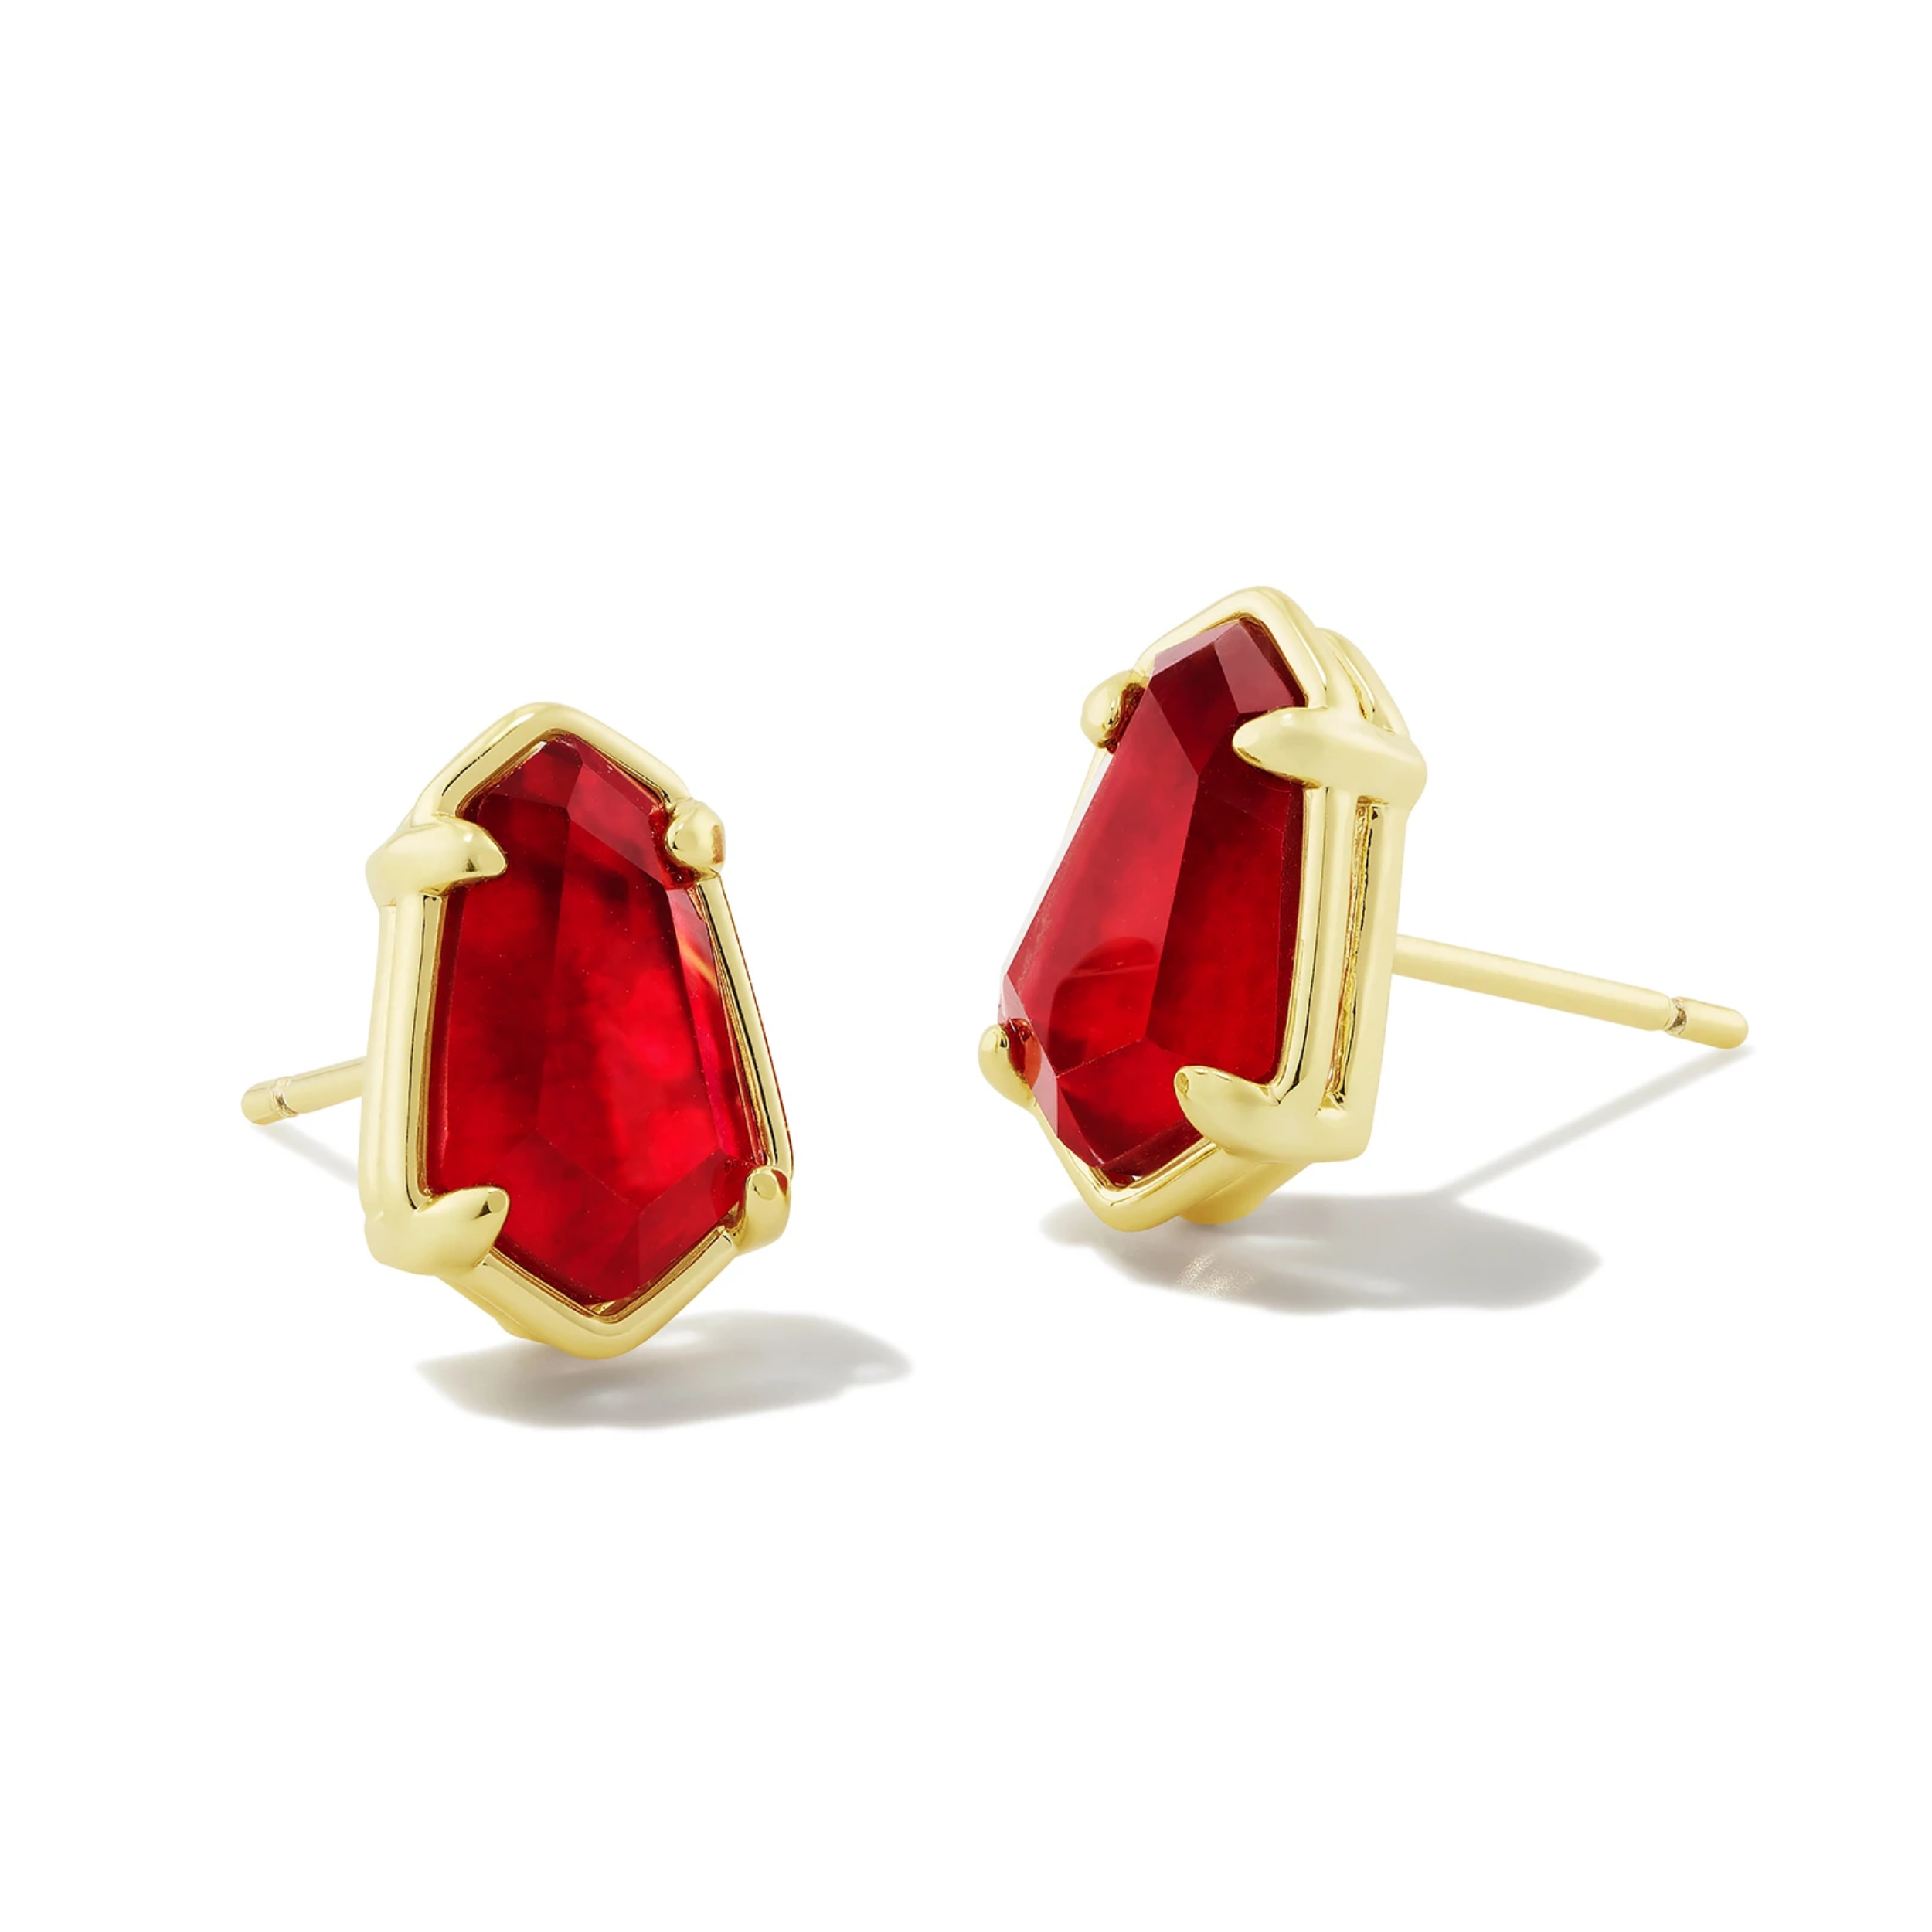 These Alexandria Gold Stud Earrings in Cranberry Illusion by Kendra Scott are Pictured on a White background.